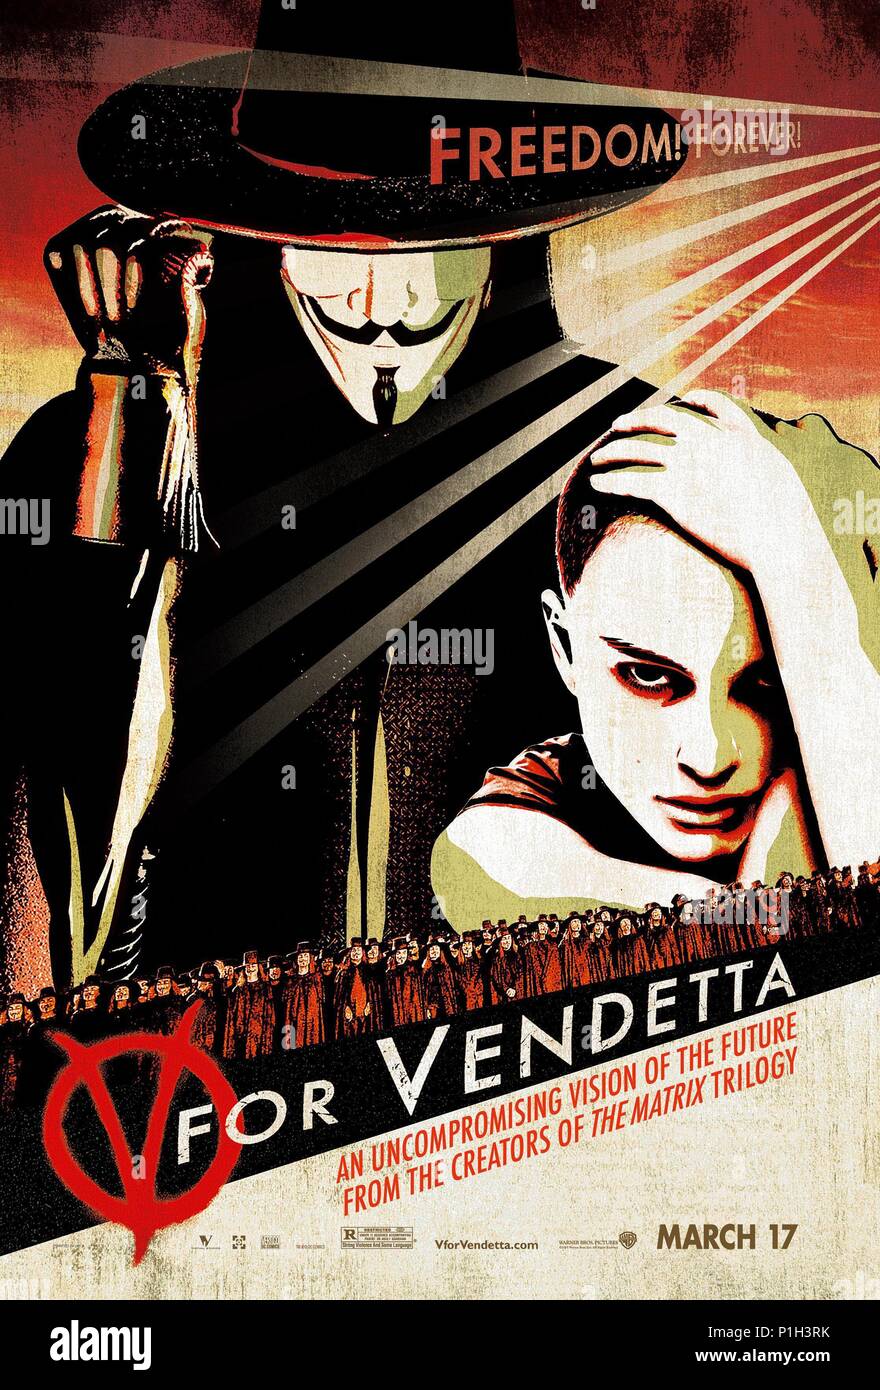 HUGO WEAVING in V FOR VENDETTA (2005), directed by JAMES MCTEIGUE. -  SuperStock